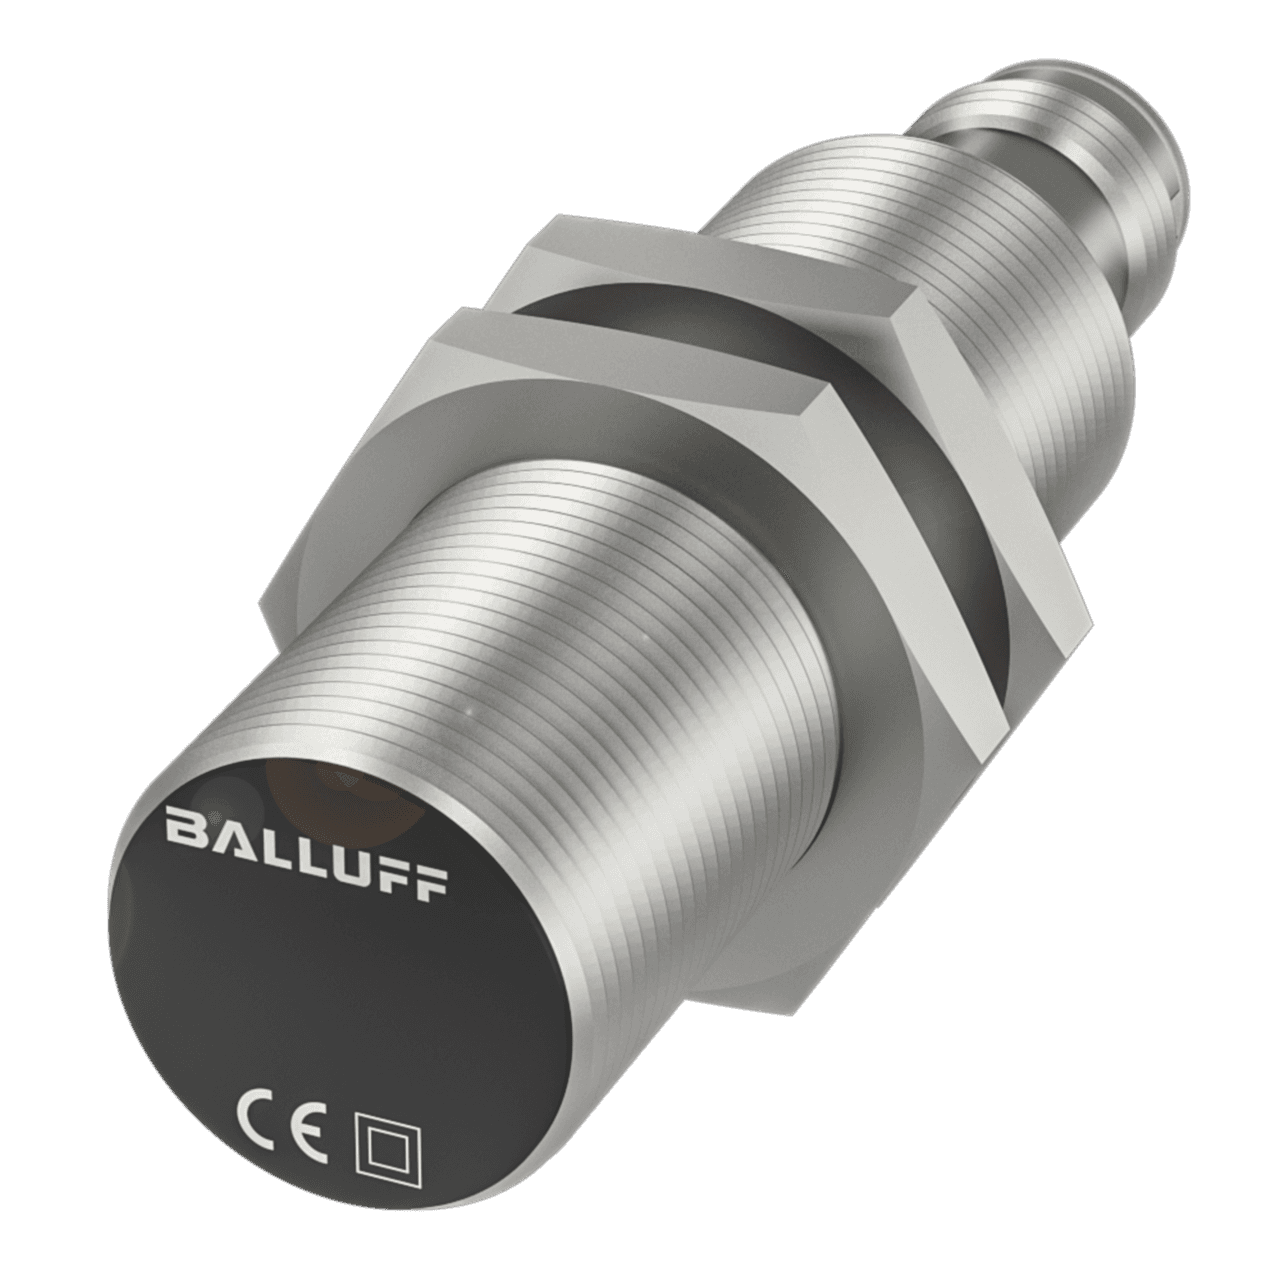 Balluff BES008L Inductive standard sensors with preferred type, Dimension: Ø 18 x 66 mm, Style: M18x1, Installation: for flush mounting, Range: 8 mm, Switching output: PNP Normally open (NO), Switching frequency: 1300 Hz, Housing material: Brass, Nickel-free coated